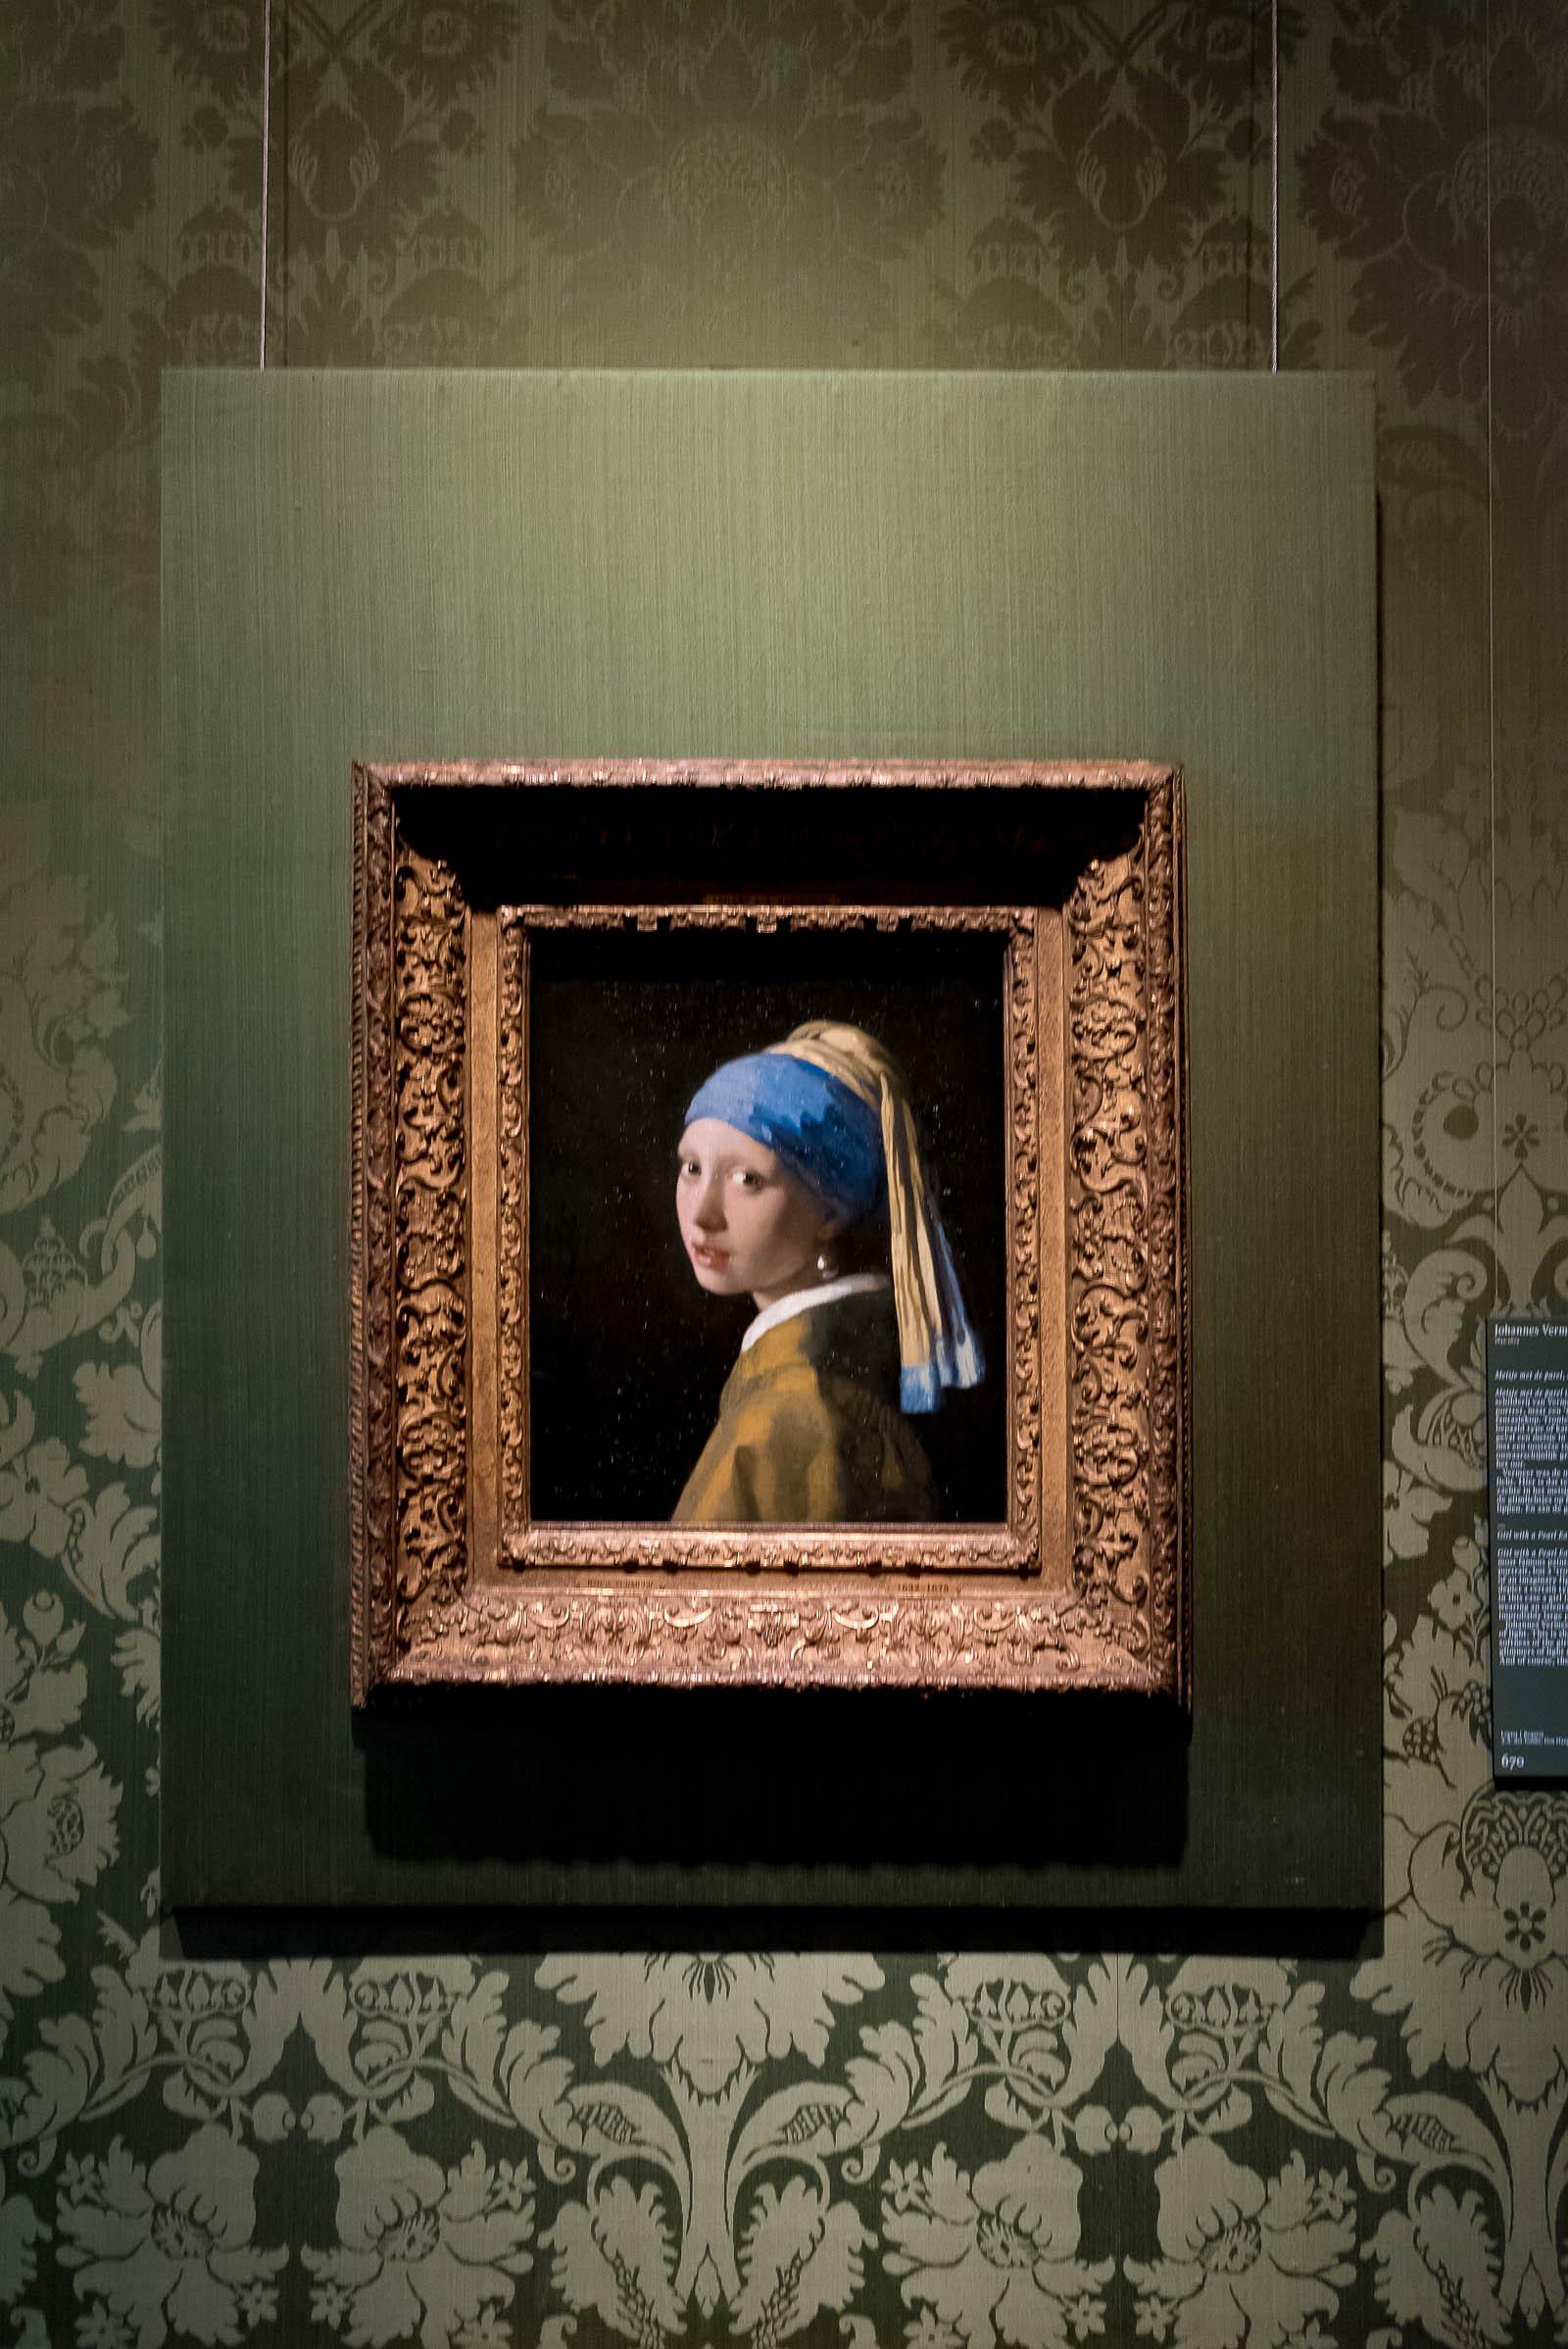 Vermeer's A Girl With A Pearl Earring Painting